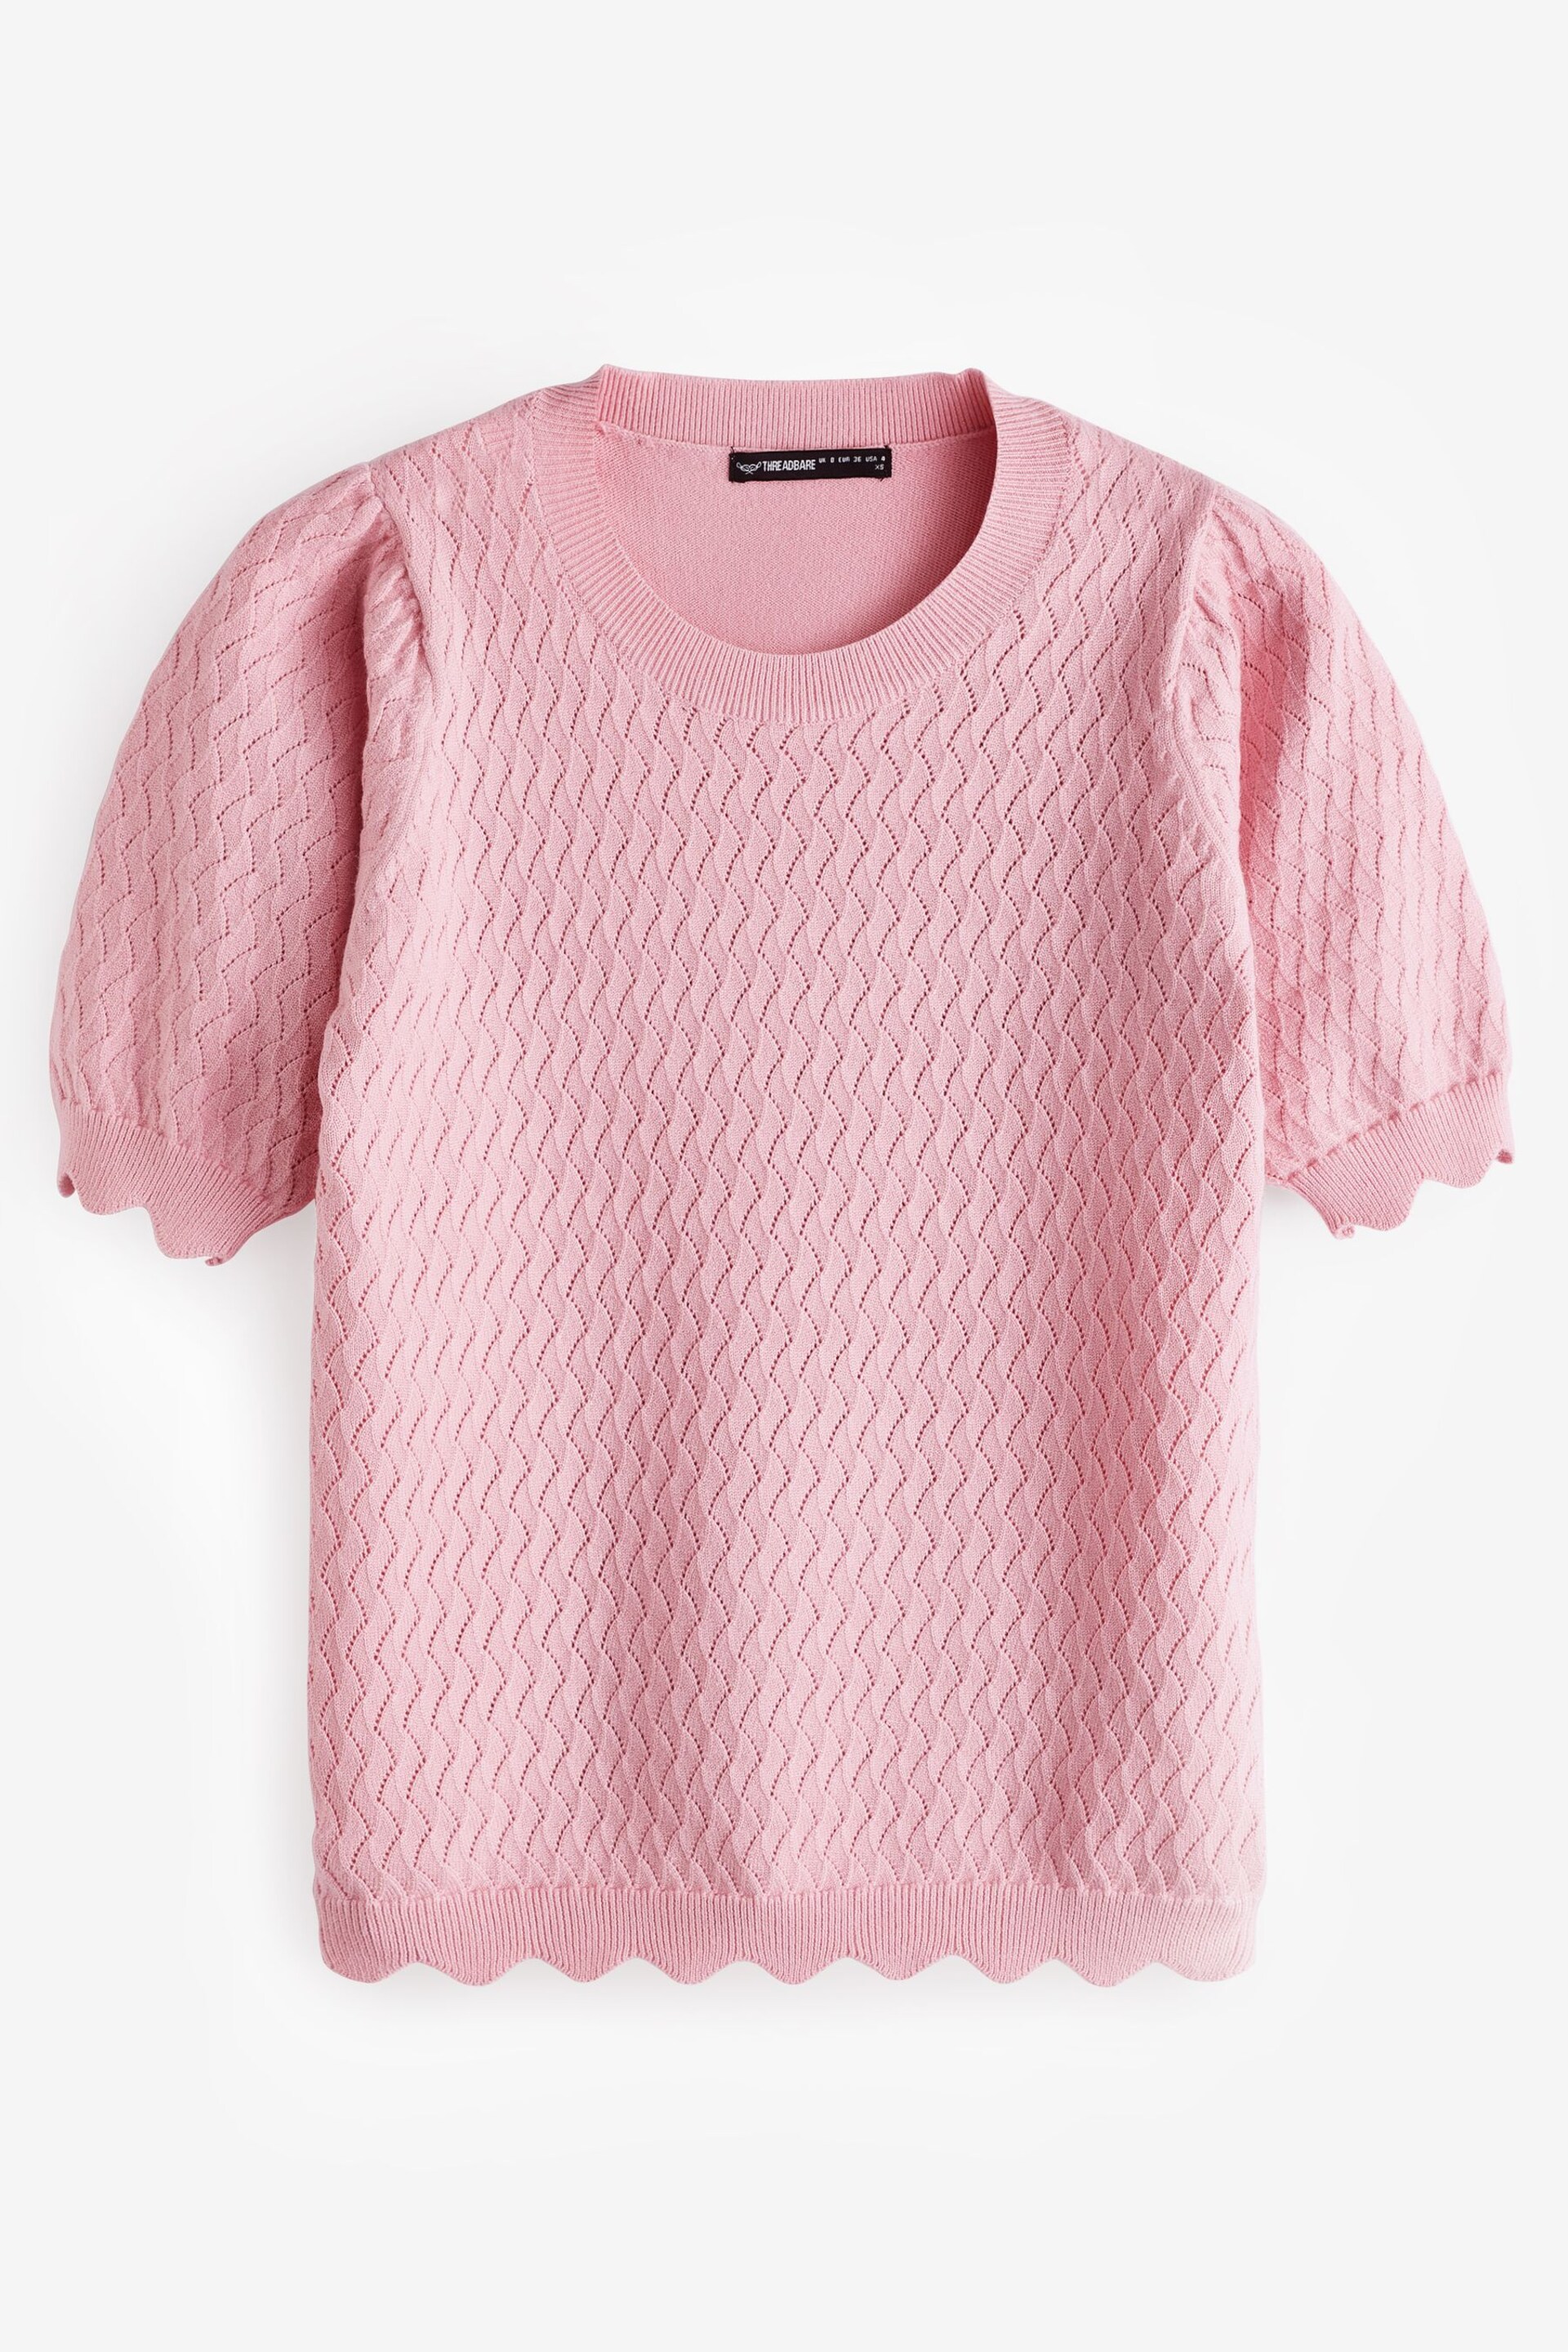 Threadbare Pink Pointelle Knitted Top - Image 3 of 4